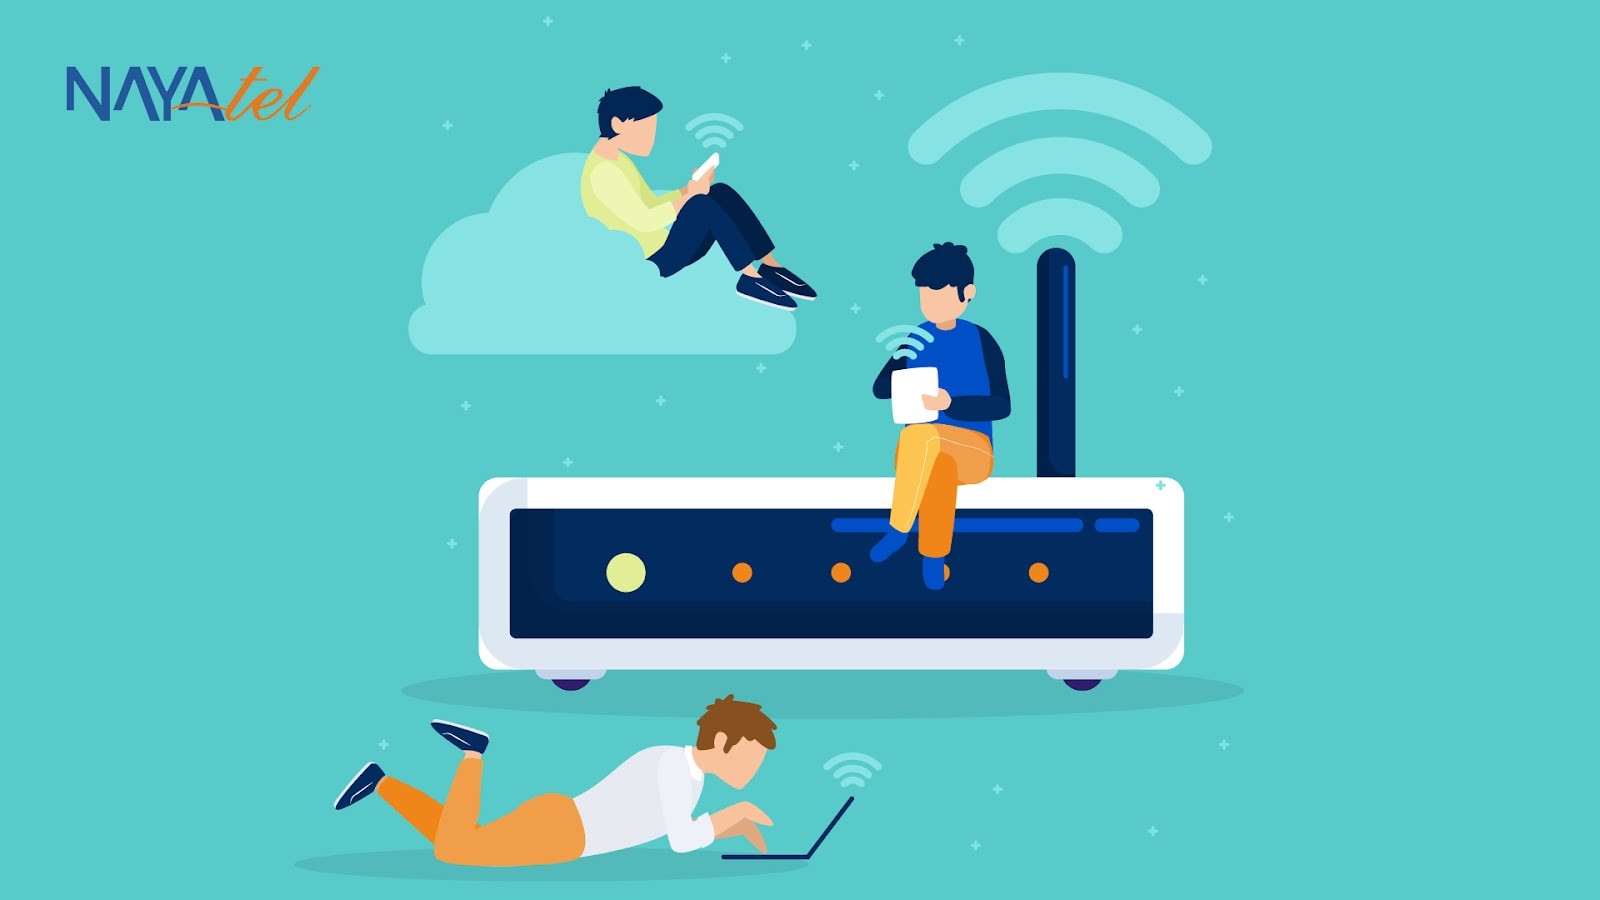 An illustration of users enjoying high-speed Wi-Fi connectivity, with a prominent router symbolizing robust internet speed.